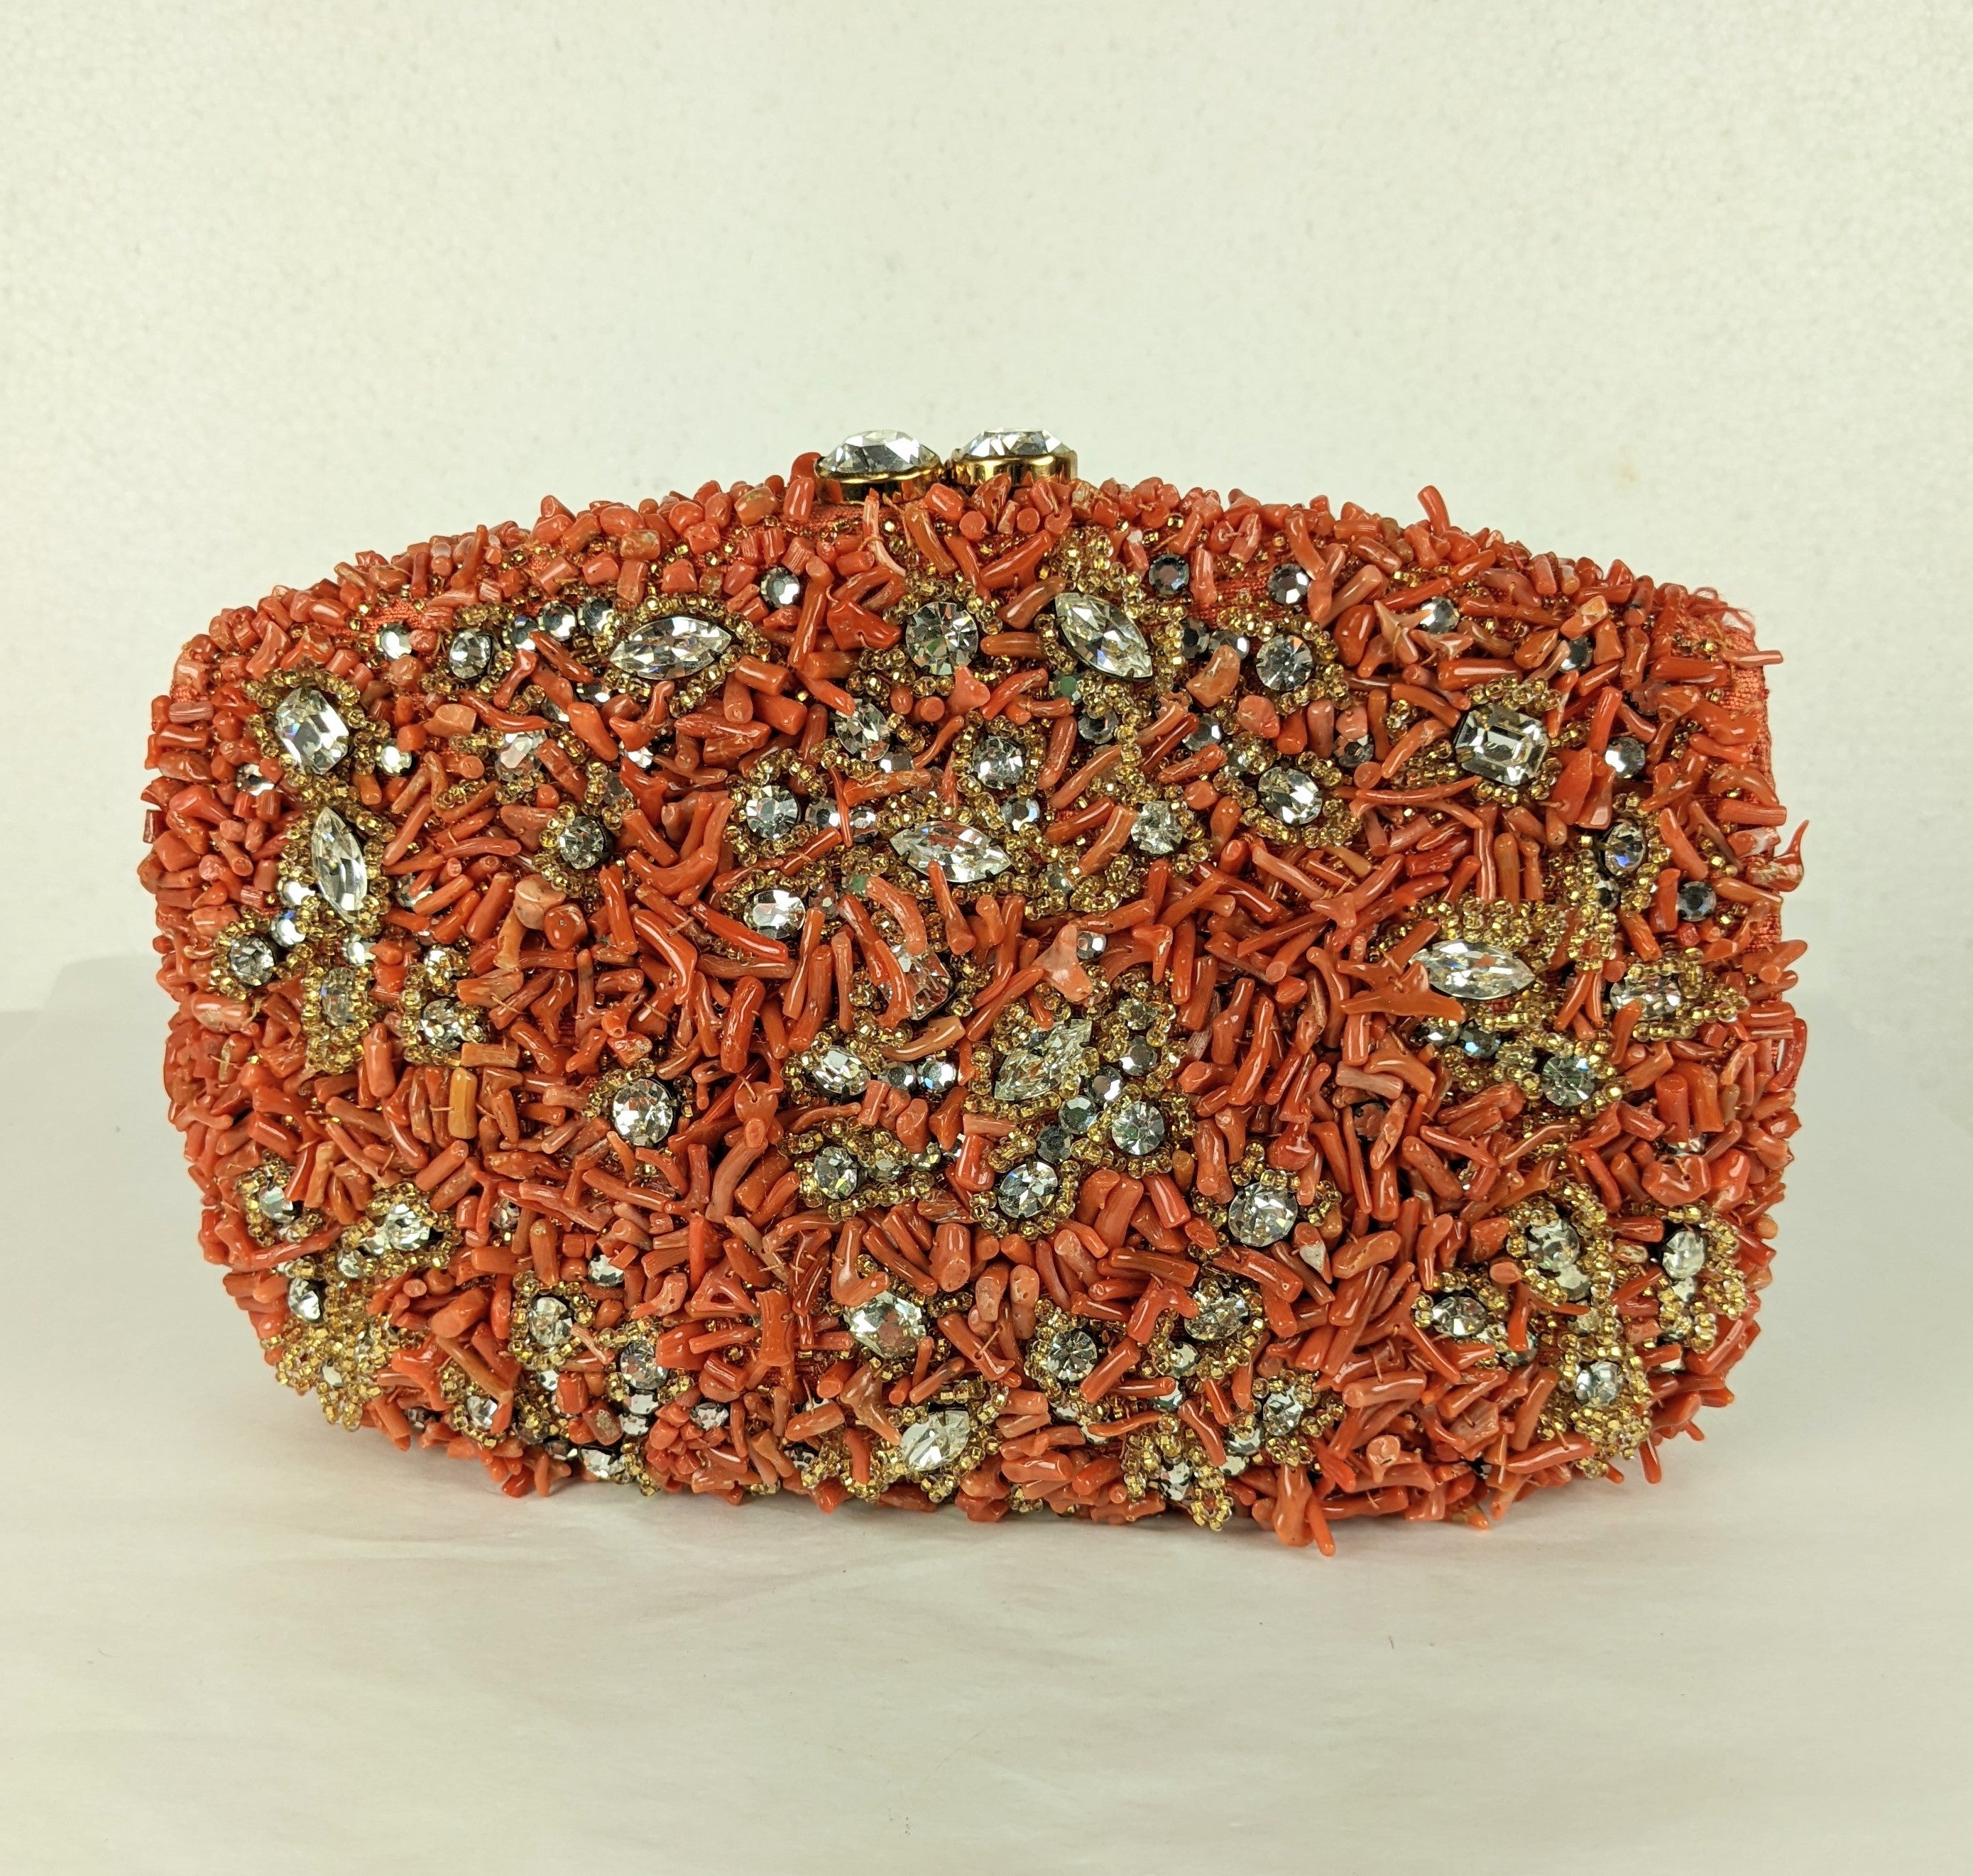 Rare, collectible Nettie Rosenstein Coral and Pave Crystal Clutch from the 1960's. Genuine branch coral is used with crystal rose montees and accented with citrine crystal glass bead decoration. Completely hand embroidered on coral silk tussah base.